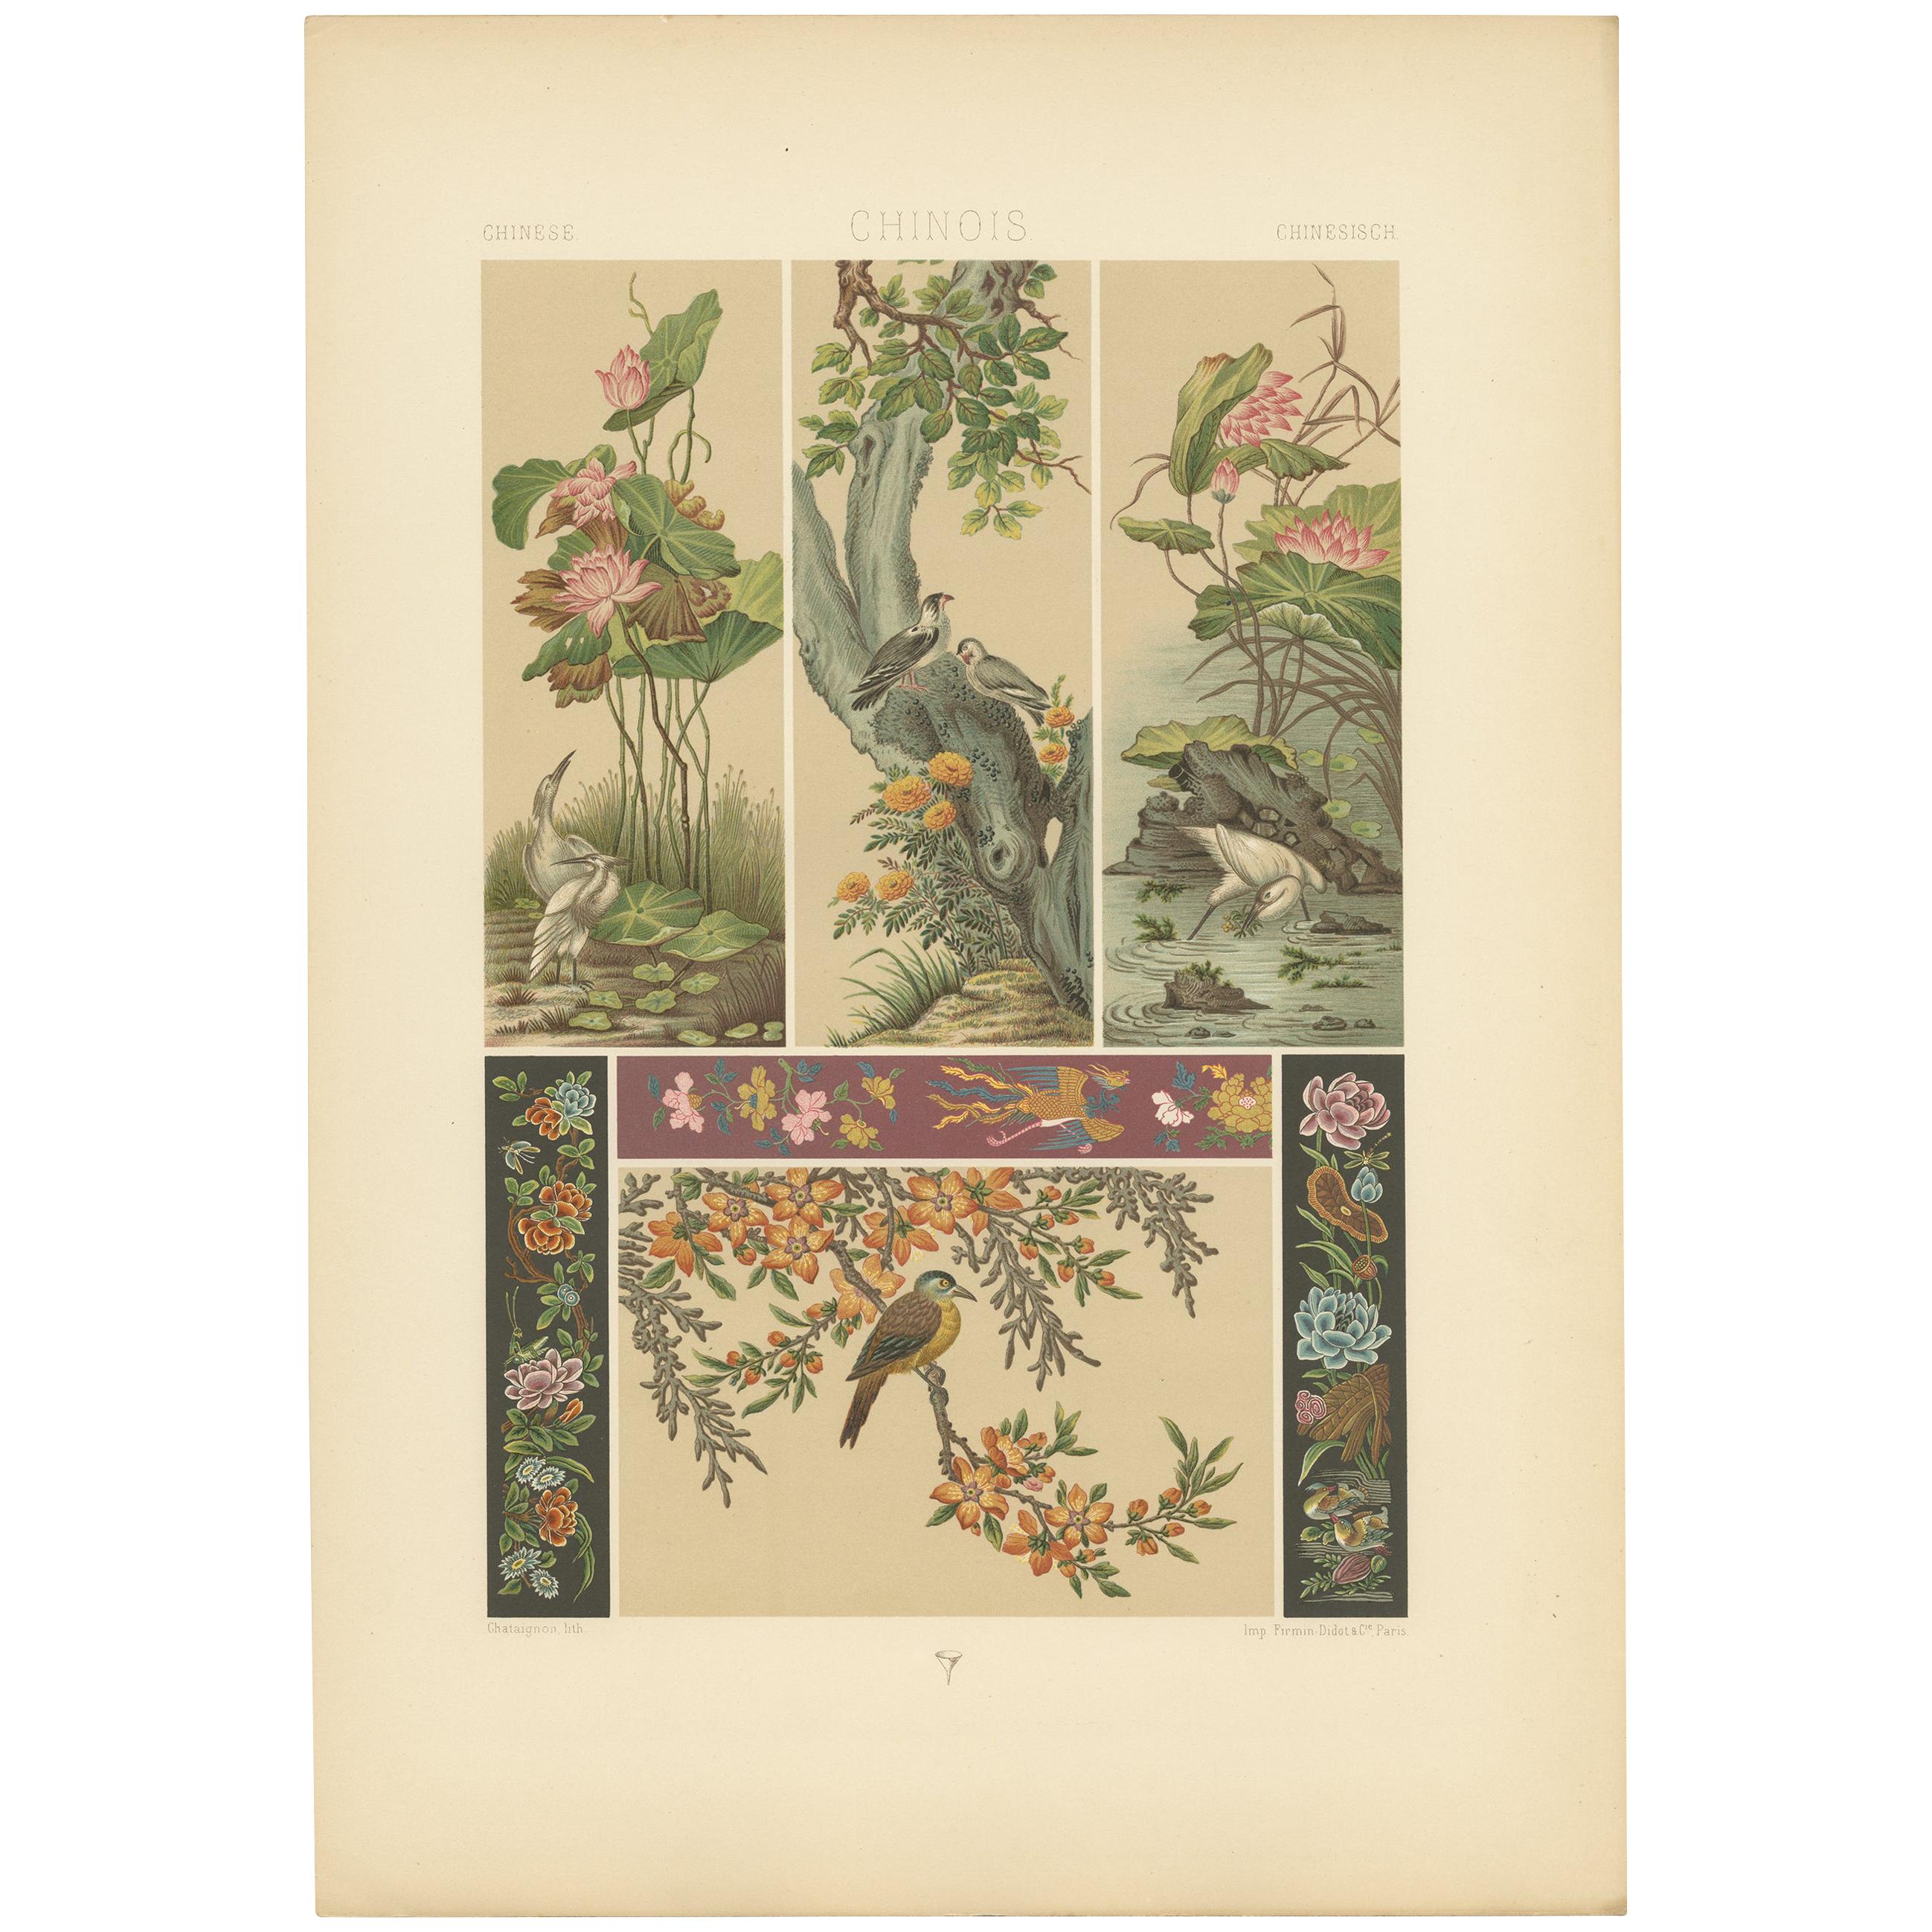 Pl. 9 Antique Print of Chinese Paintings, Embroideries by Racinet, 'circa 1890'